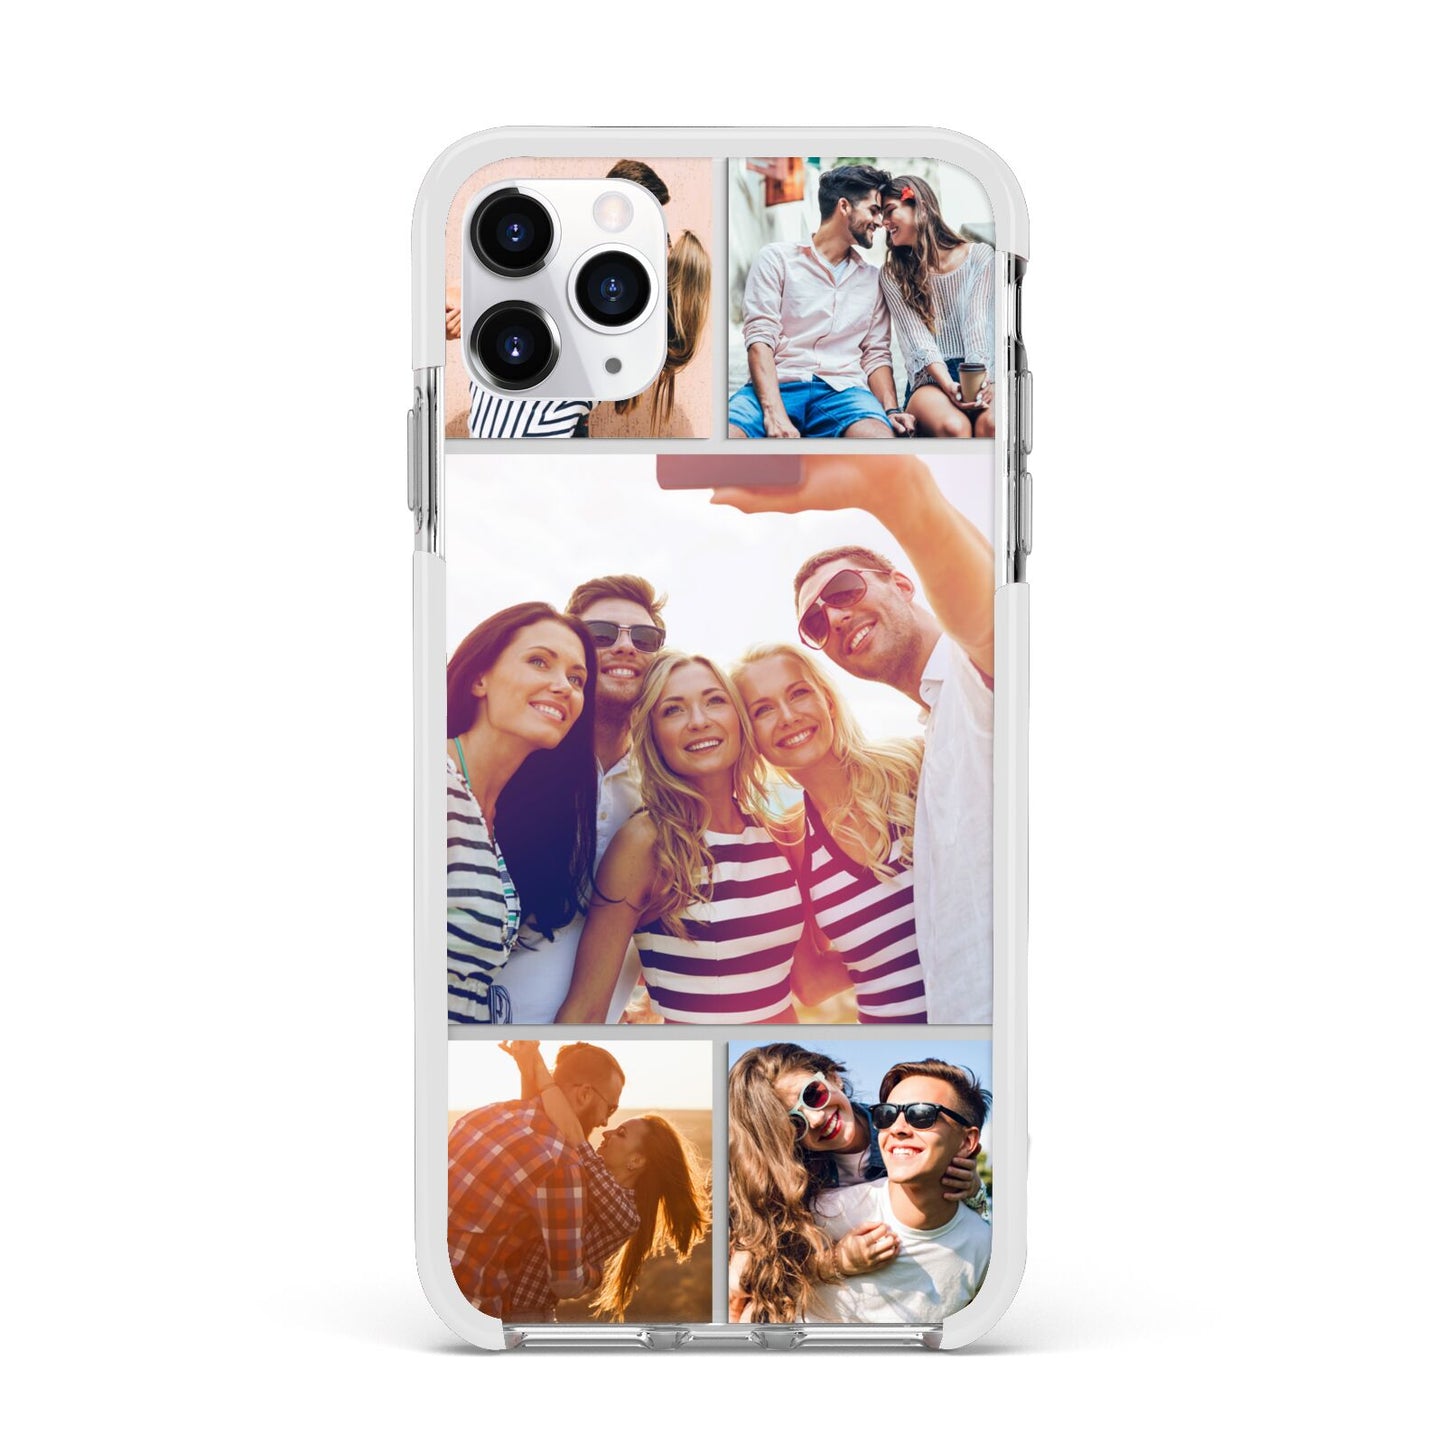 Tile Photo Collage Upload Apple iPhone 11 Pro Max in Silver with White Impact Case